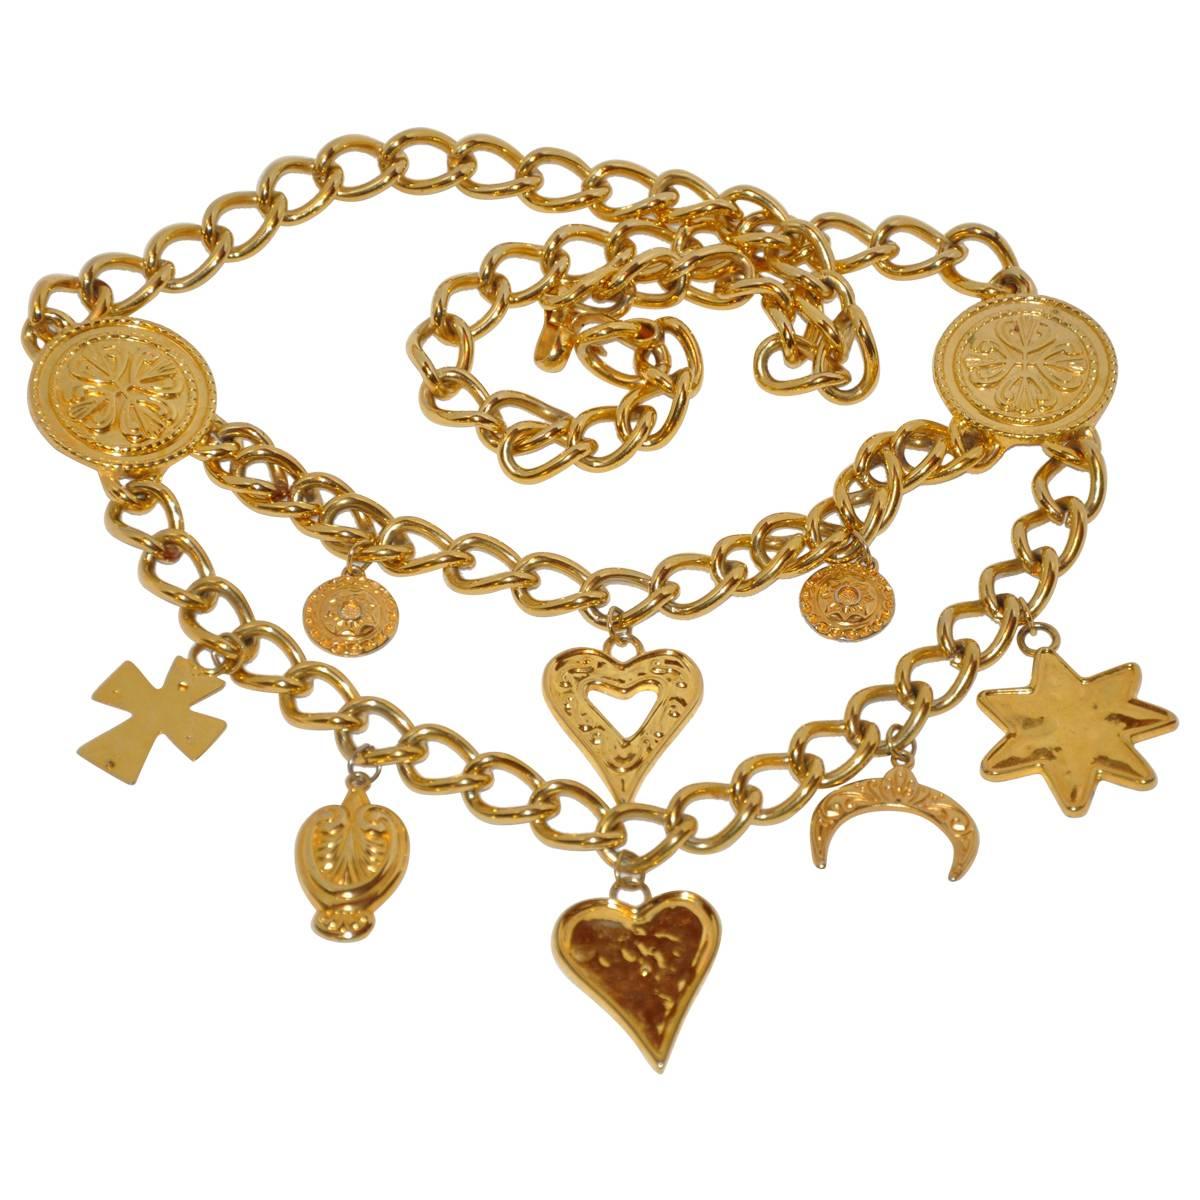 Gilded Gold Vermeil Hardware Double-Row Chain-Link Multi "Charms" Belt